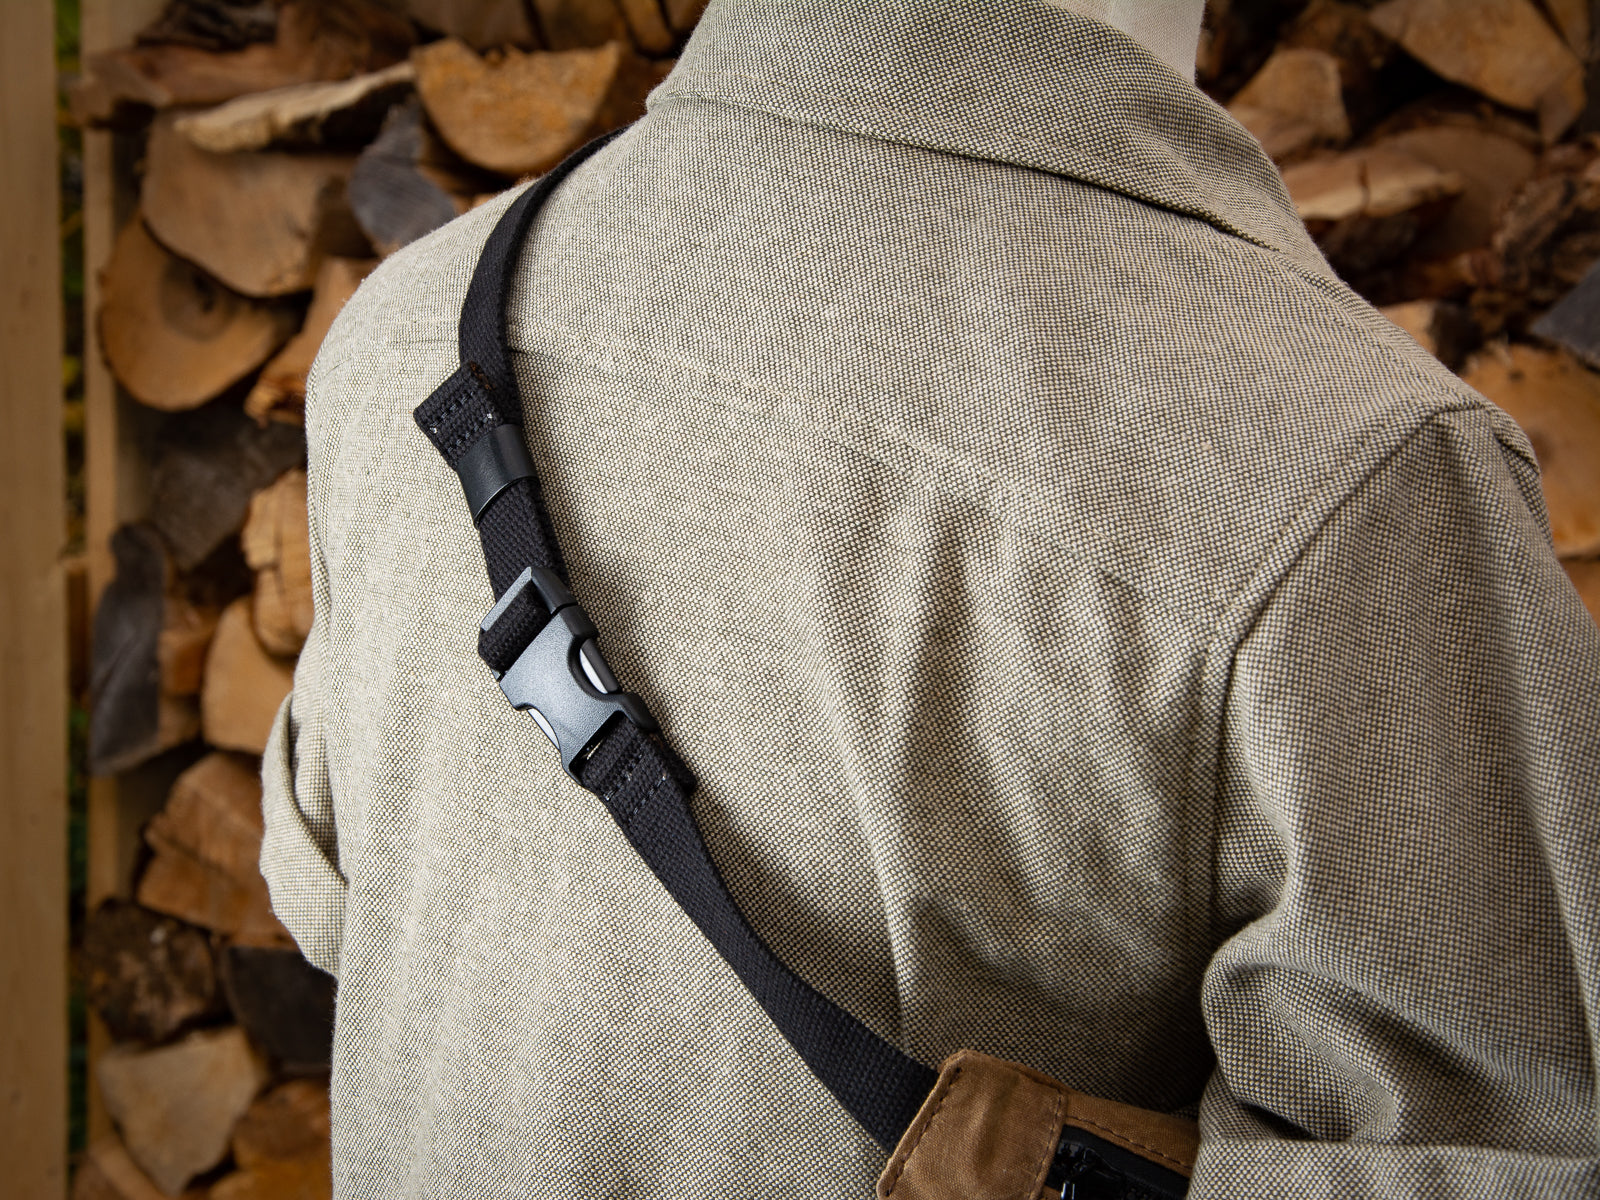 Detail picture of plastic clasp lock on strap of nutmeg colour waxed canvas fanny pack.